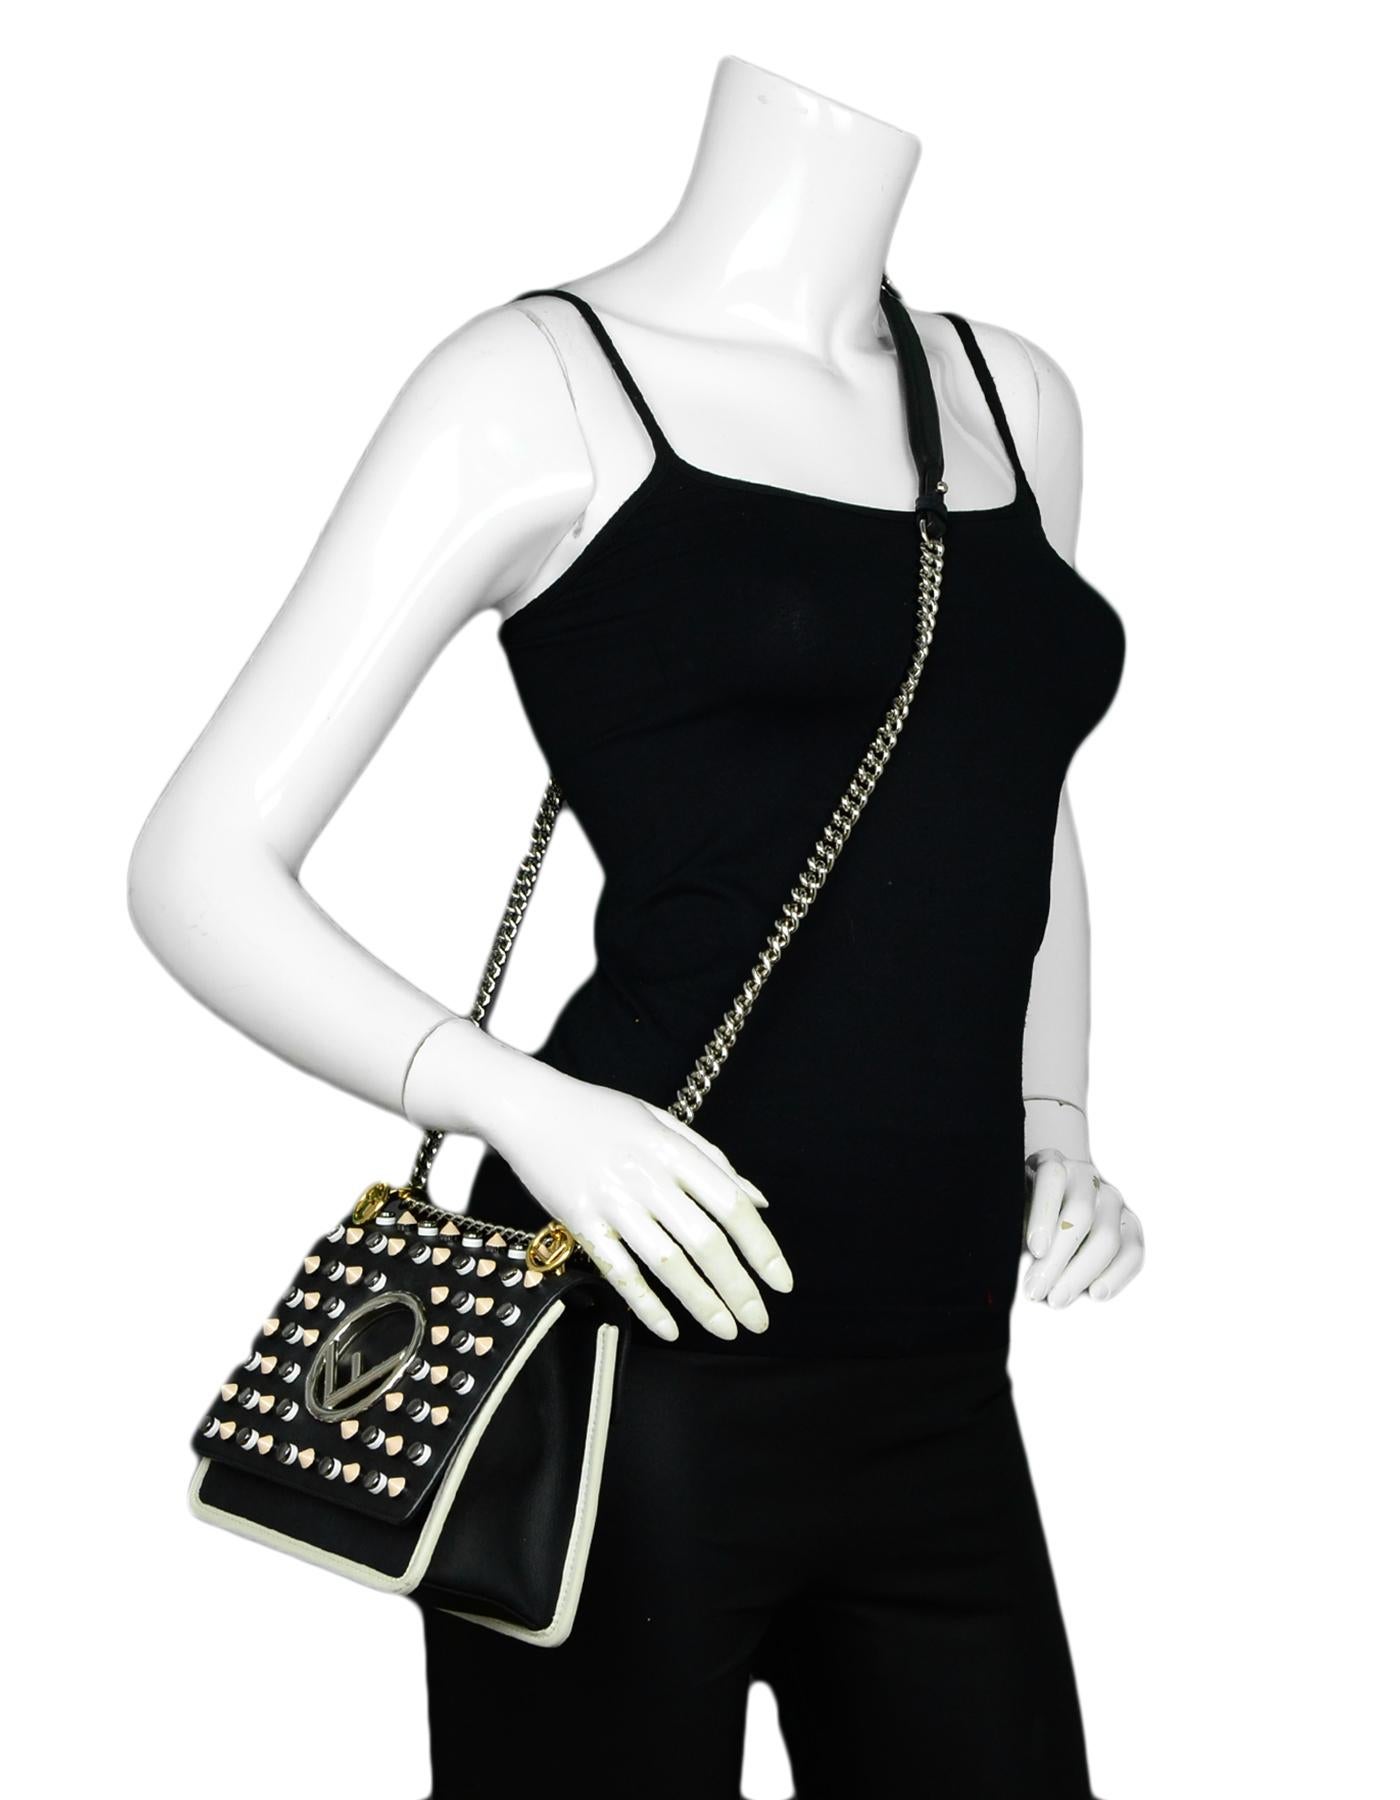 Fendi Black Leather Kan Studded F Logo Flap Crossbody Bag

Made In: Italy
Color: Black
Hardware: Silvertone, Goldtone
Materials: Leather
Lining: Suede
Closure/Opening: Top flap with magnetic snap
Exterior Pockets: None 
Interior Pockets: Flat